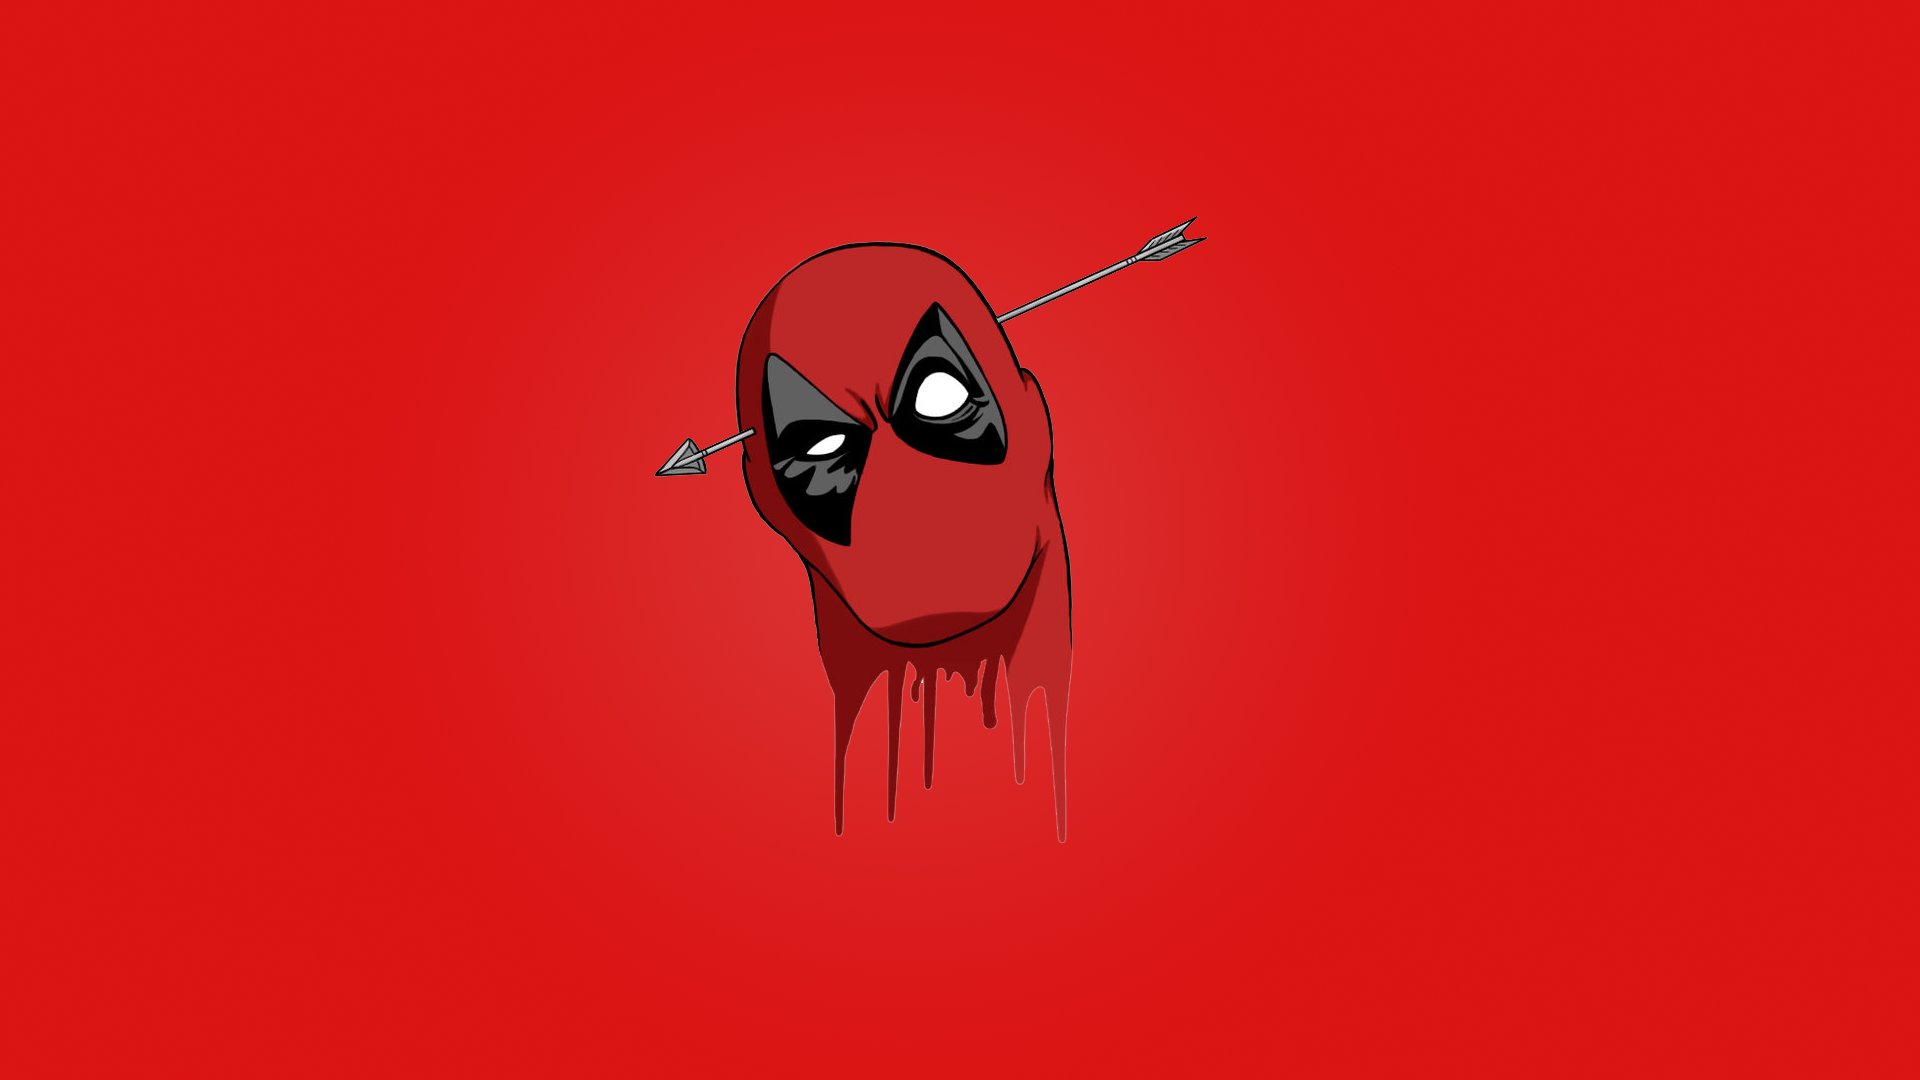 General 1920x1080 Deadpool antiheroes arrows (design) red background simple background comic art red blood